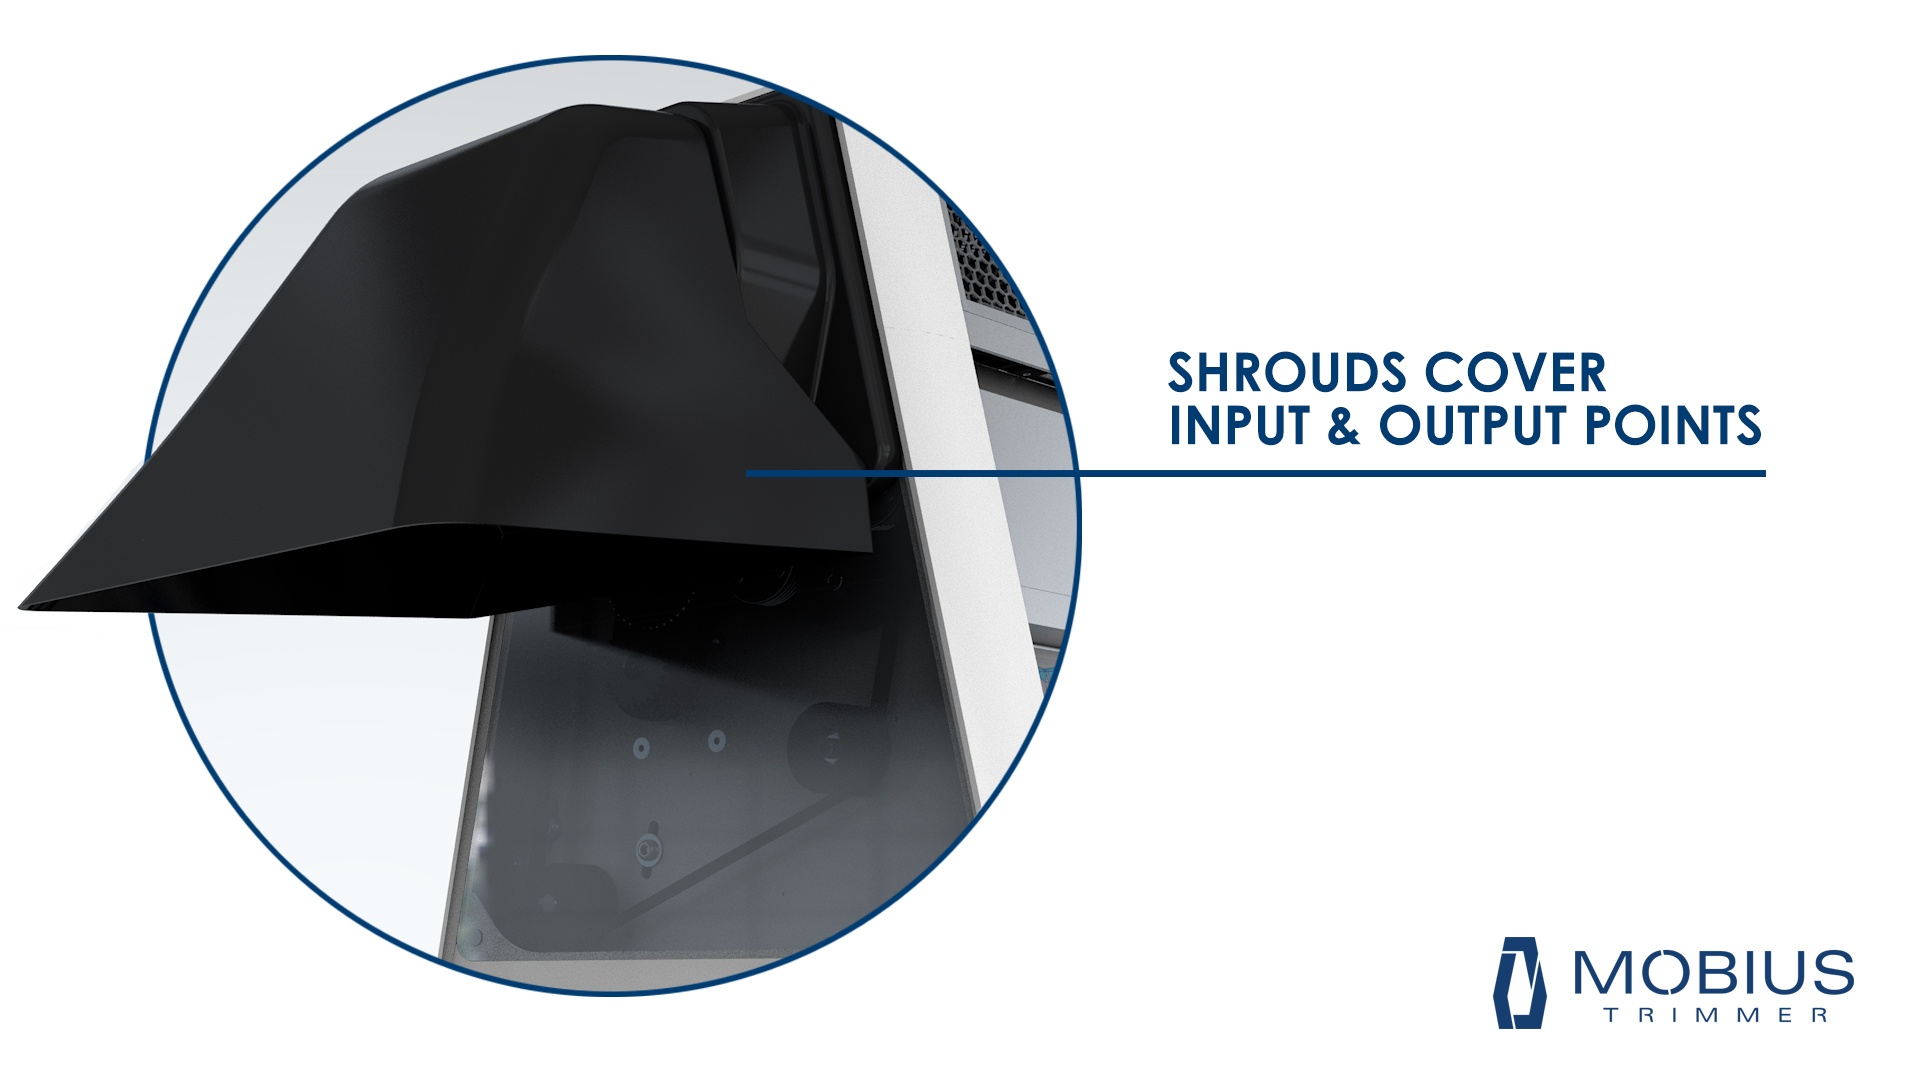 One of the safety features on the Mobius Trimmer M108 - input and output shrouds.